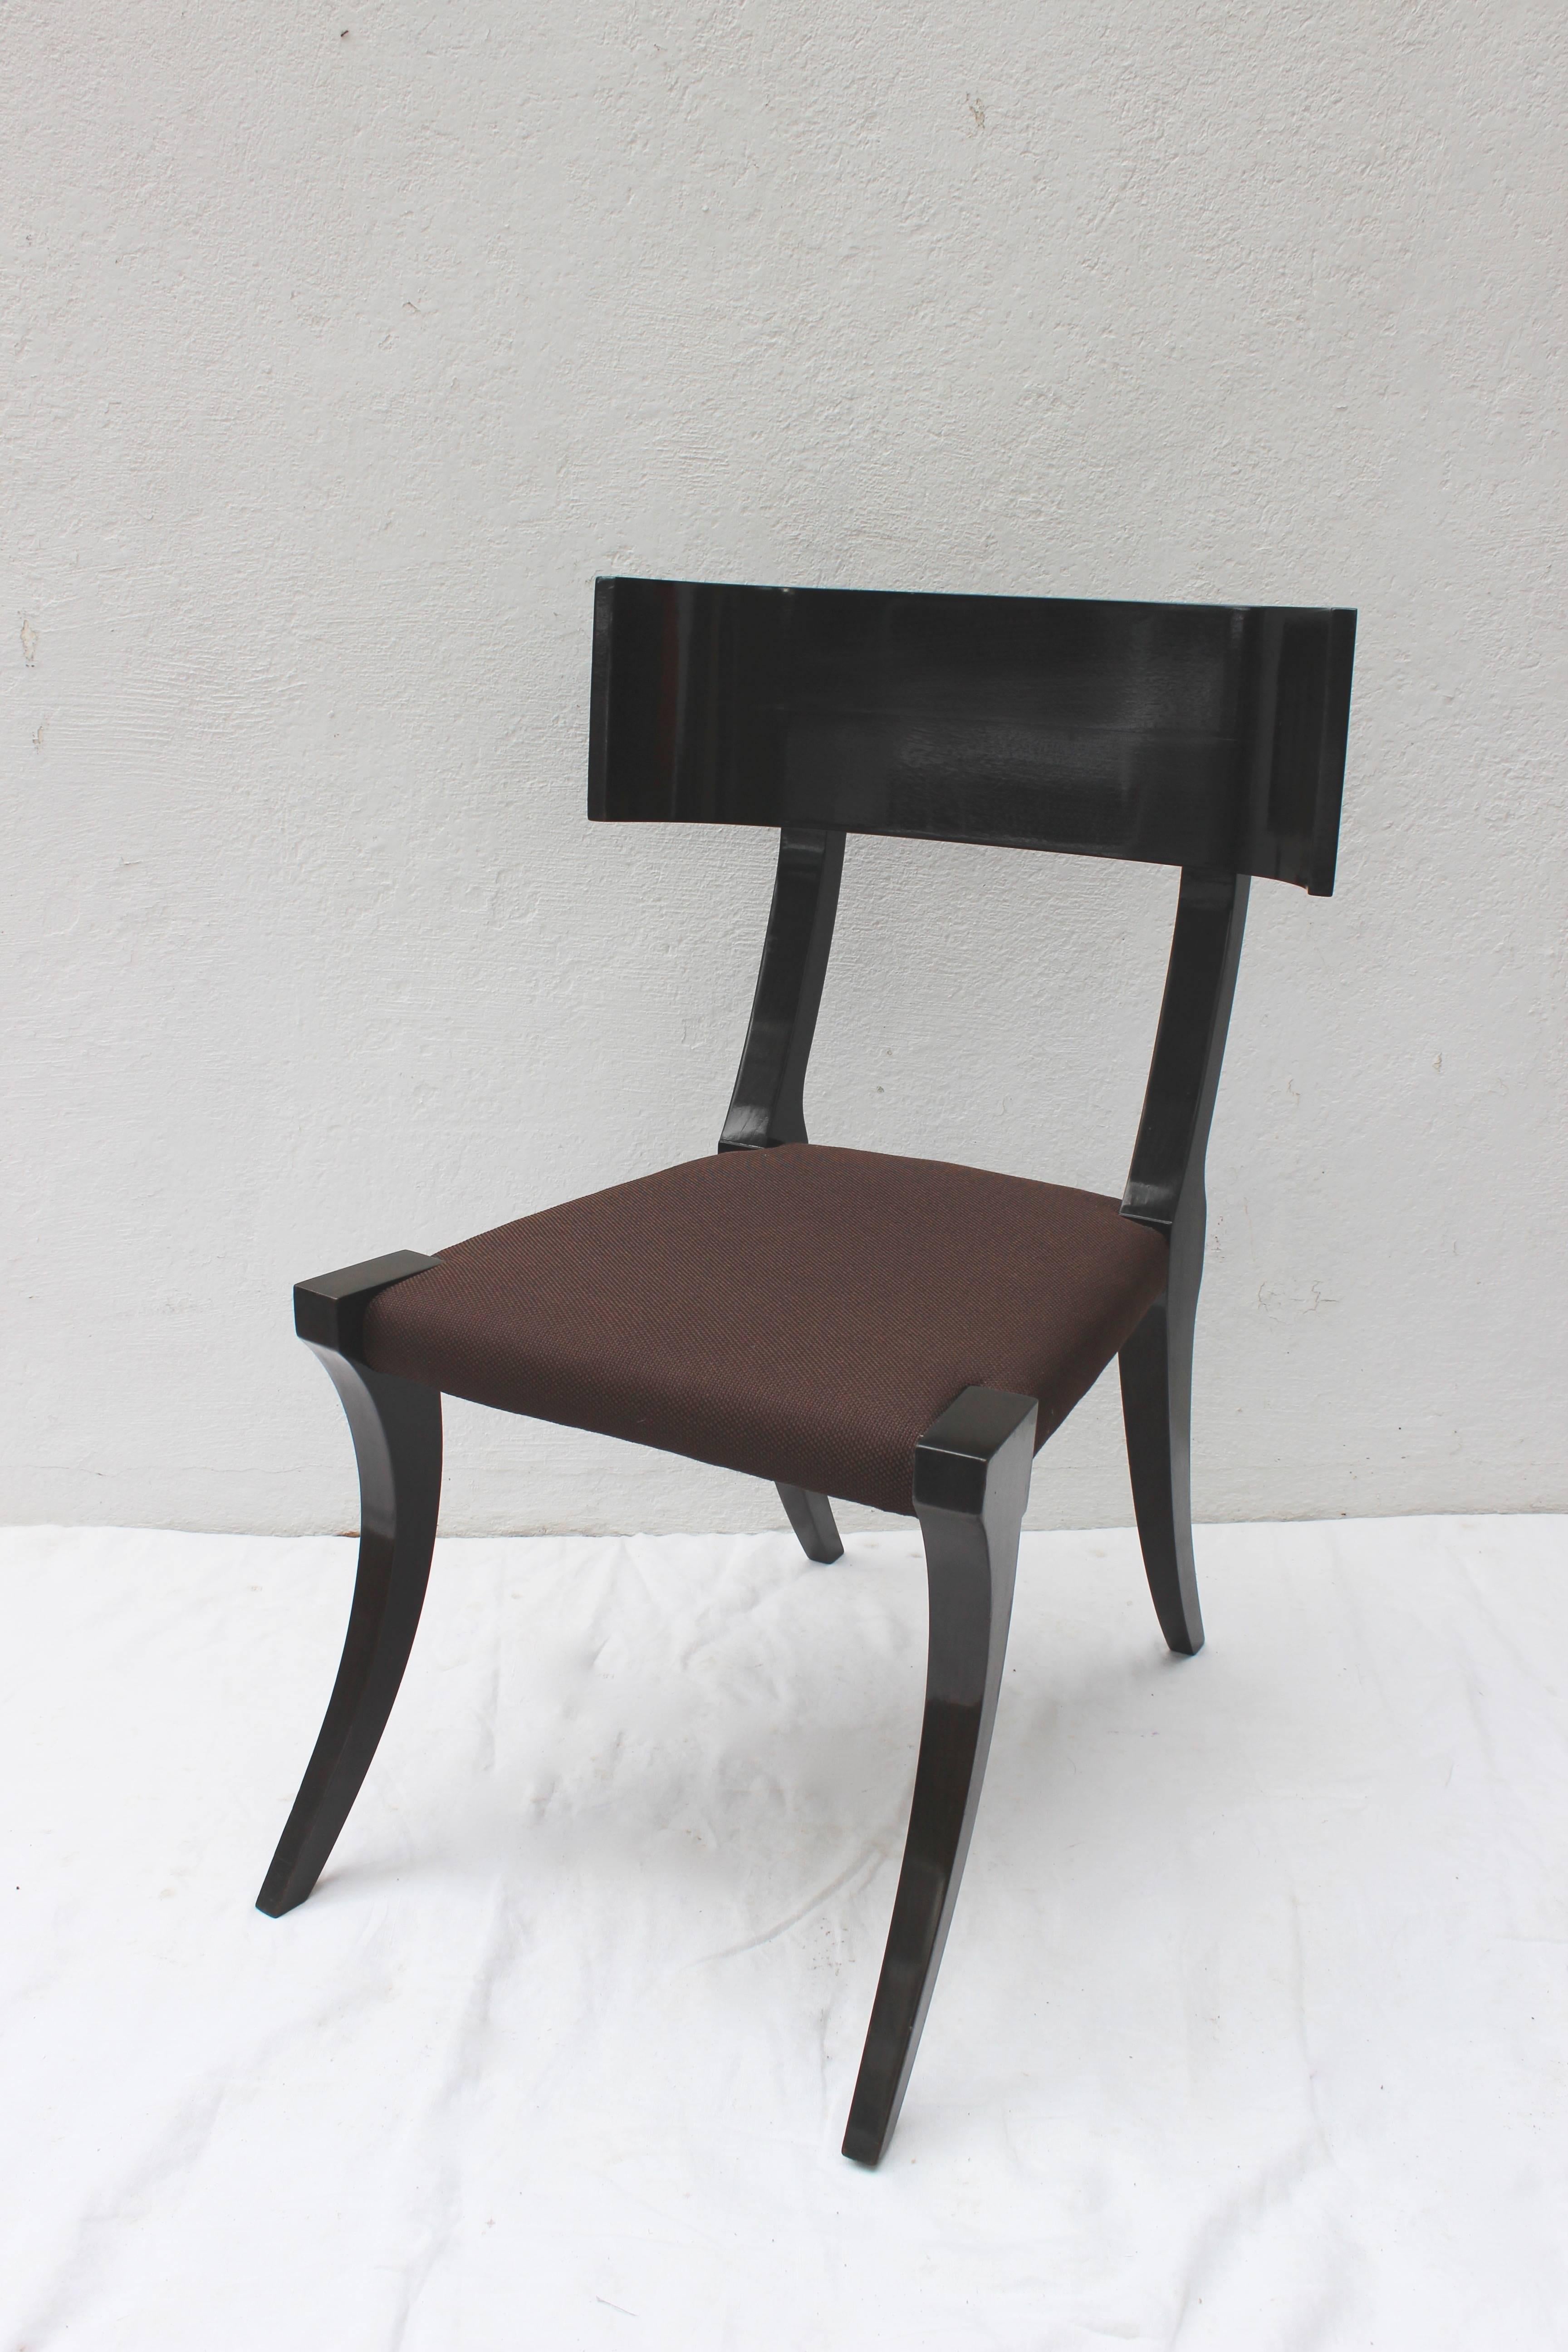 Klismos Style Chair with Upholstered Seat